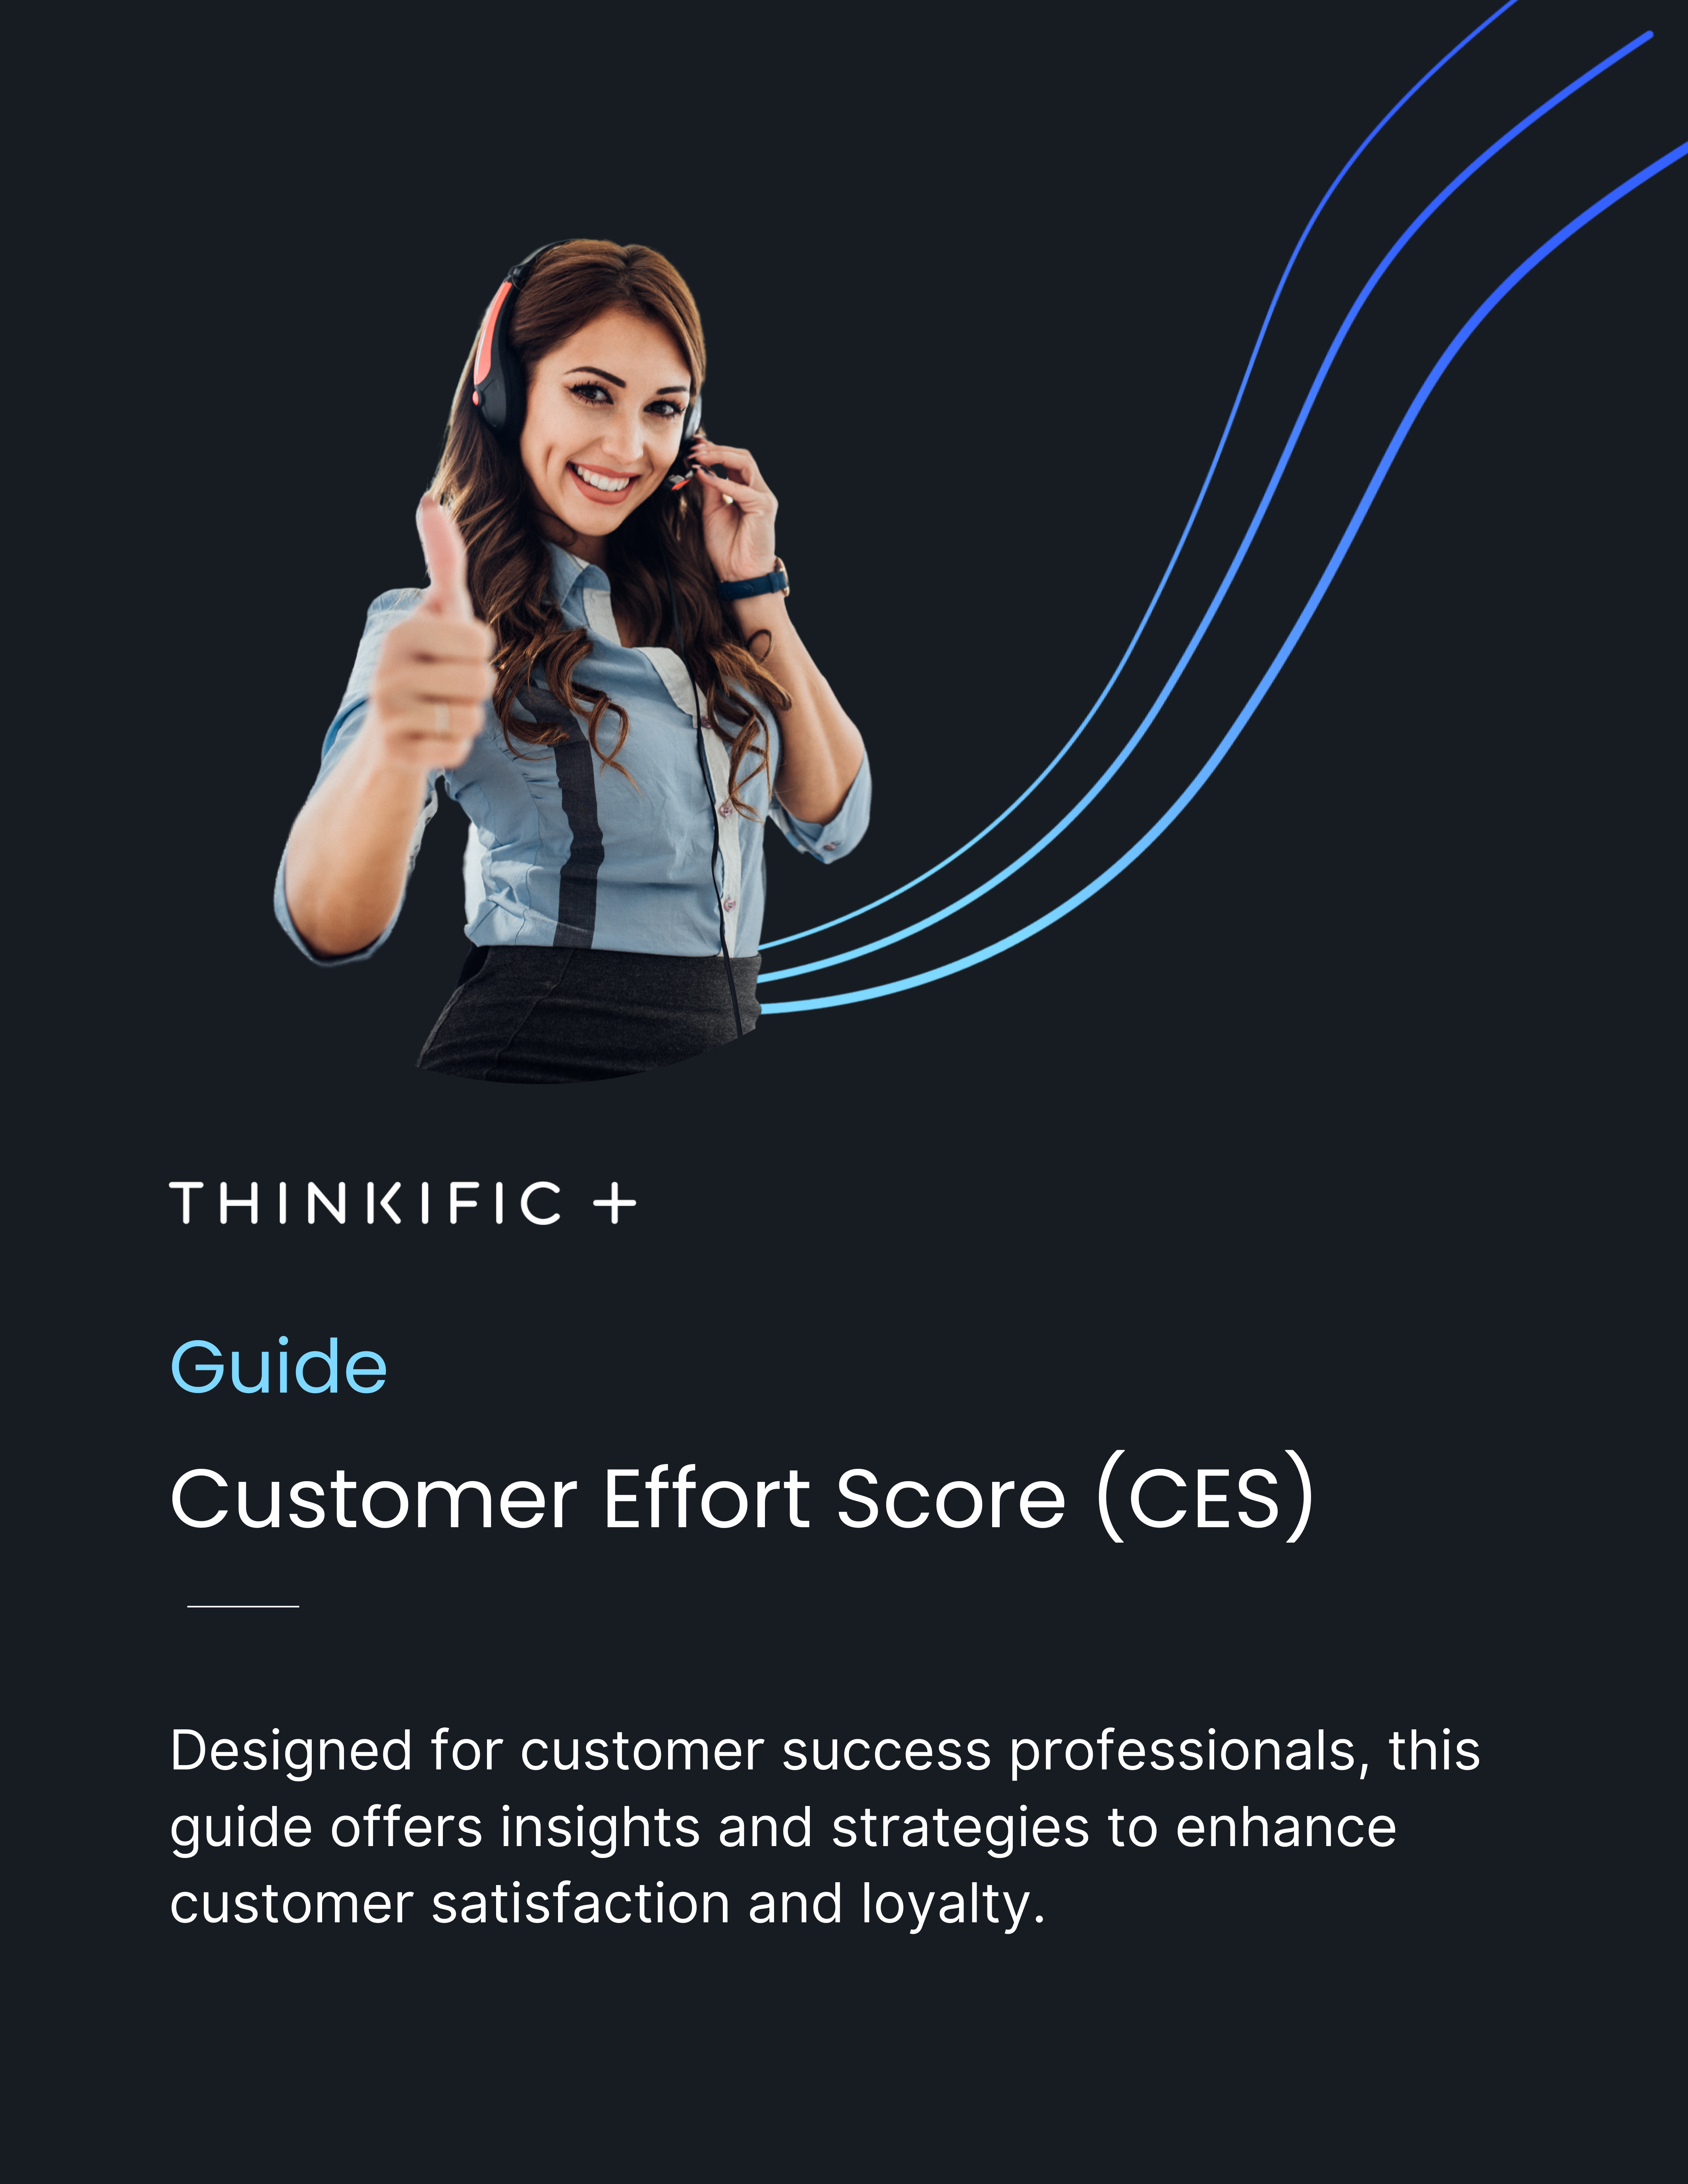 Free Guide to Customer Effort Score : Download Now